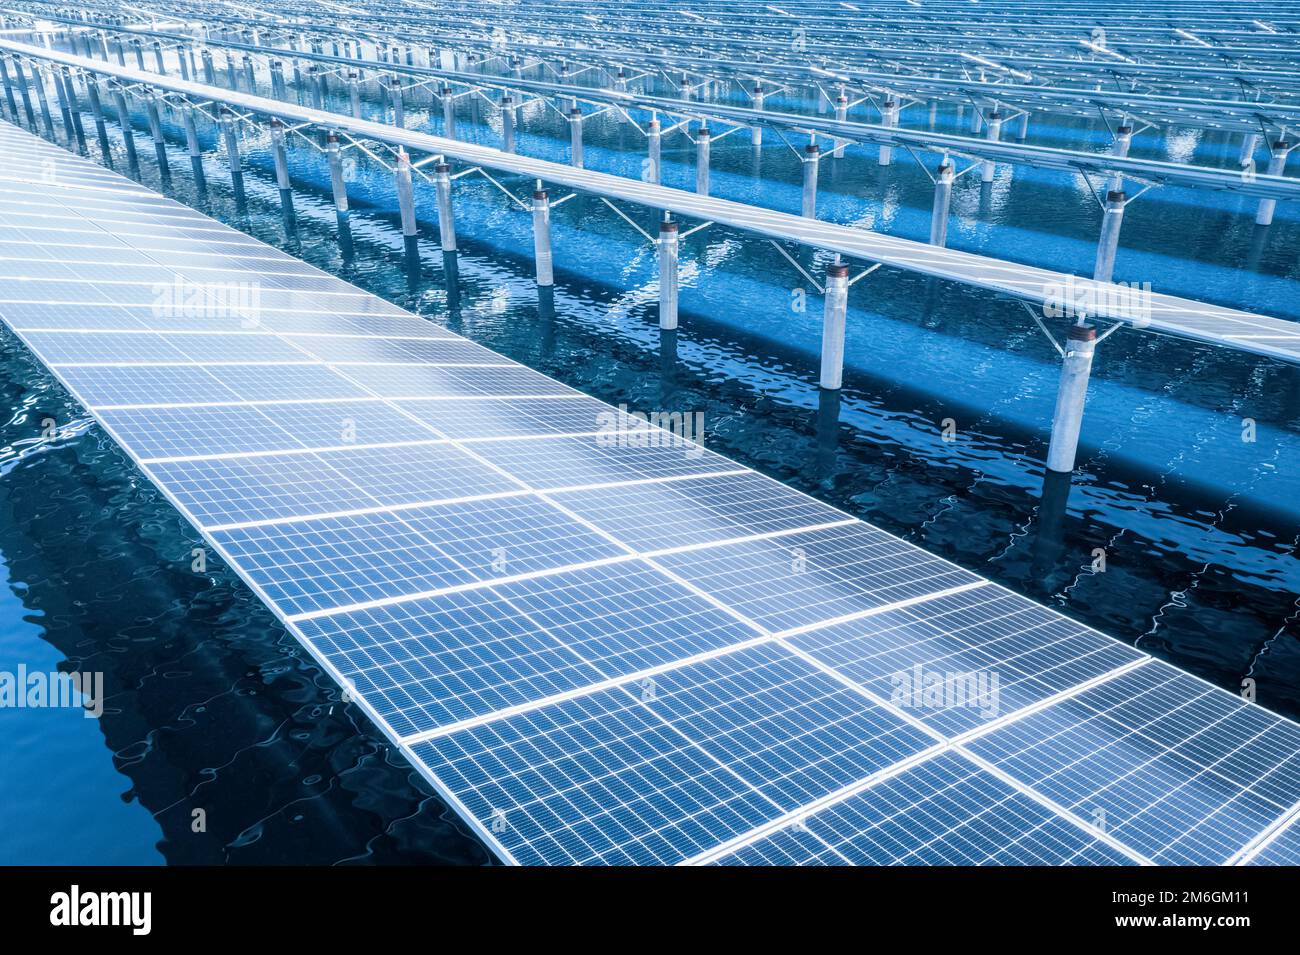 Photovoltaic power station closeup on water Stock Photo